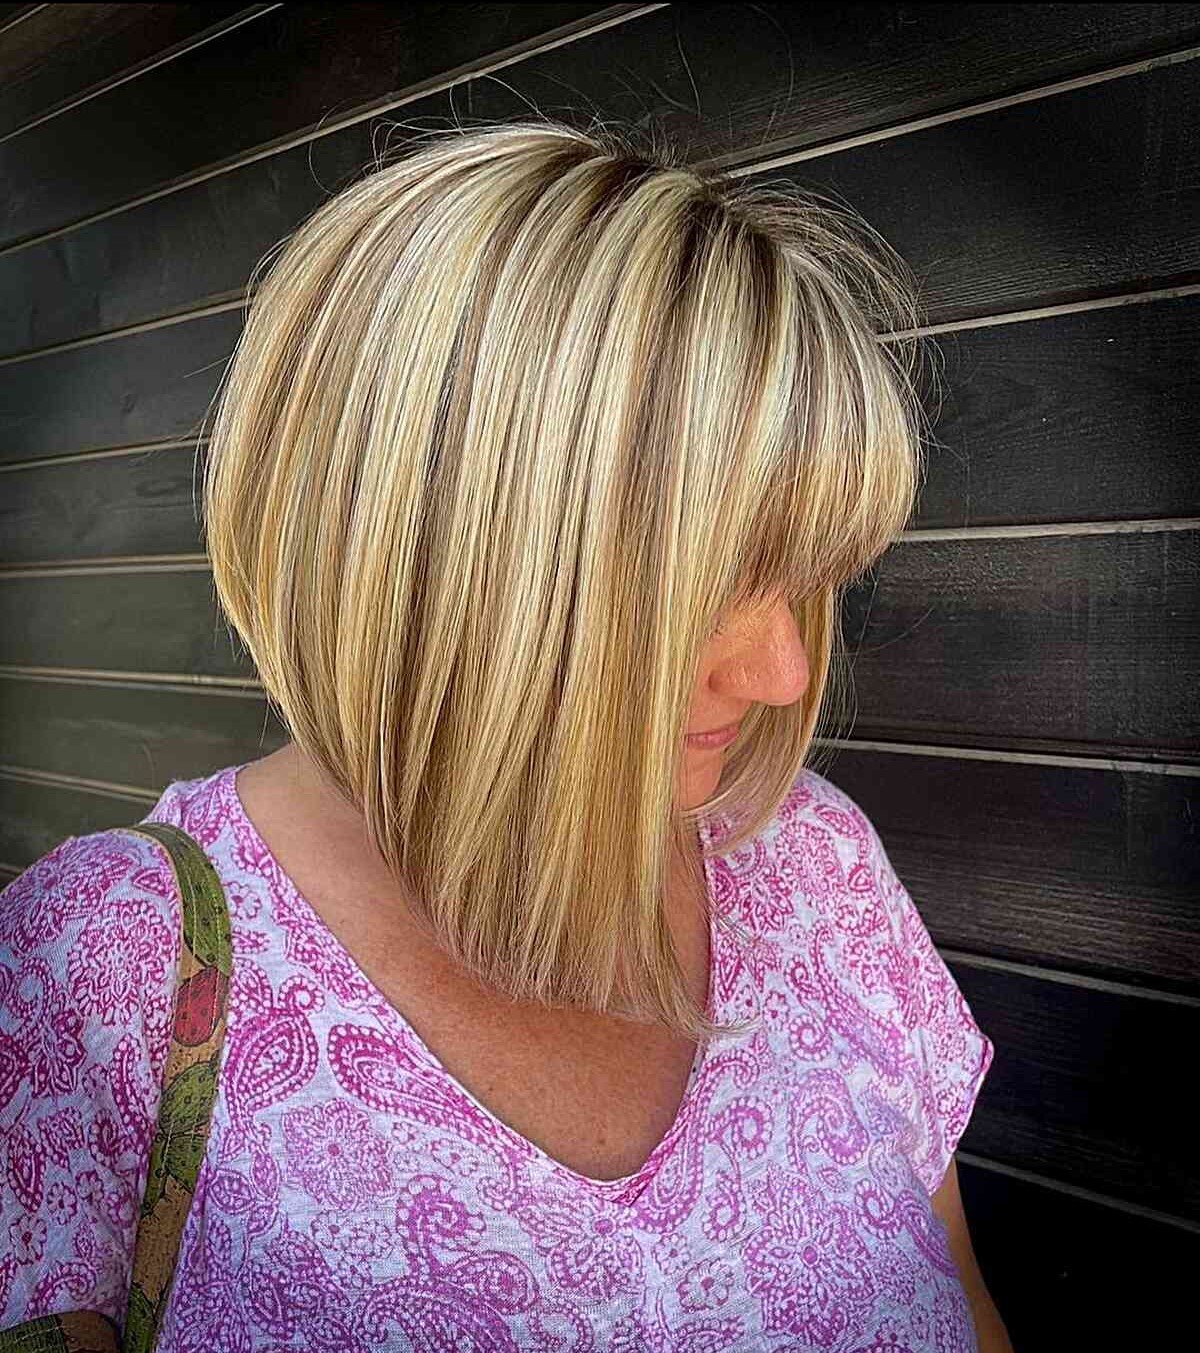 Neck-Length A-Line Blonde Hair with Dark Roots and Bangs for Older Ladies Aged 50